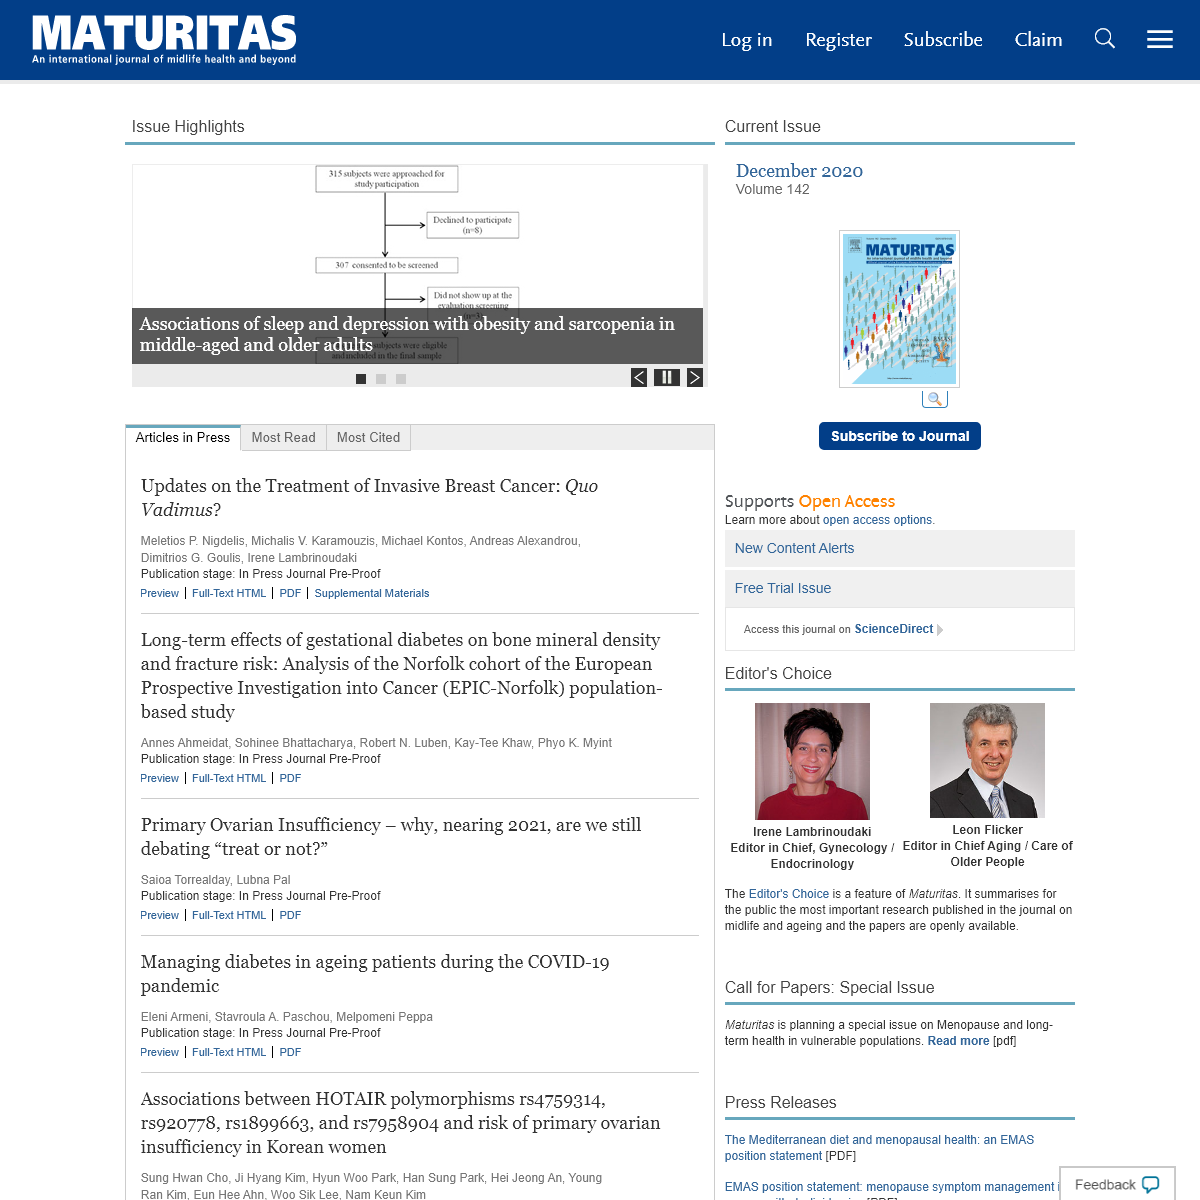 A complete backup of maturitas.org